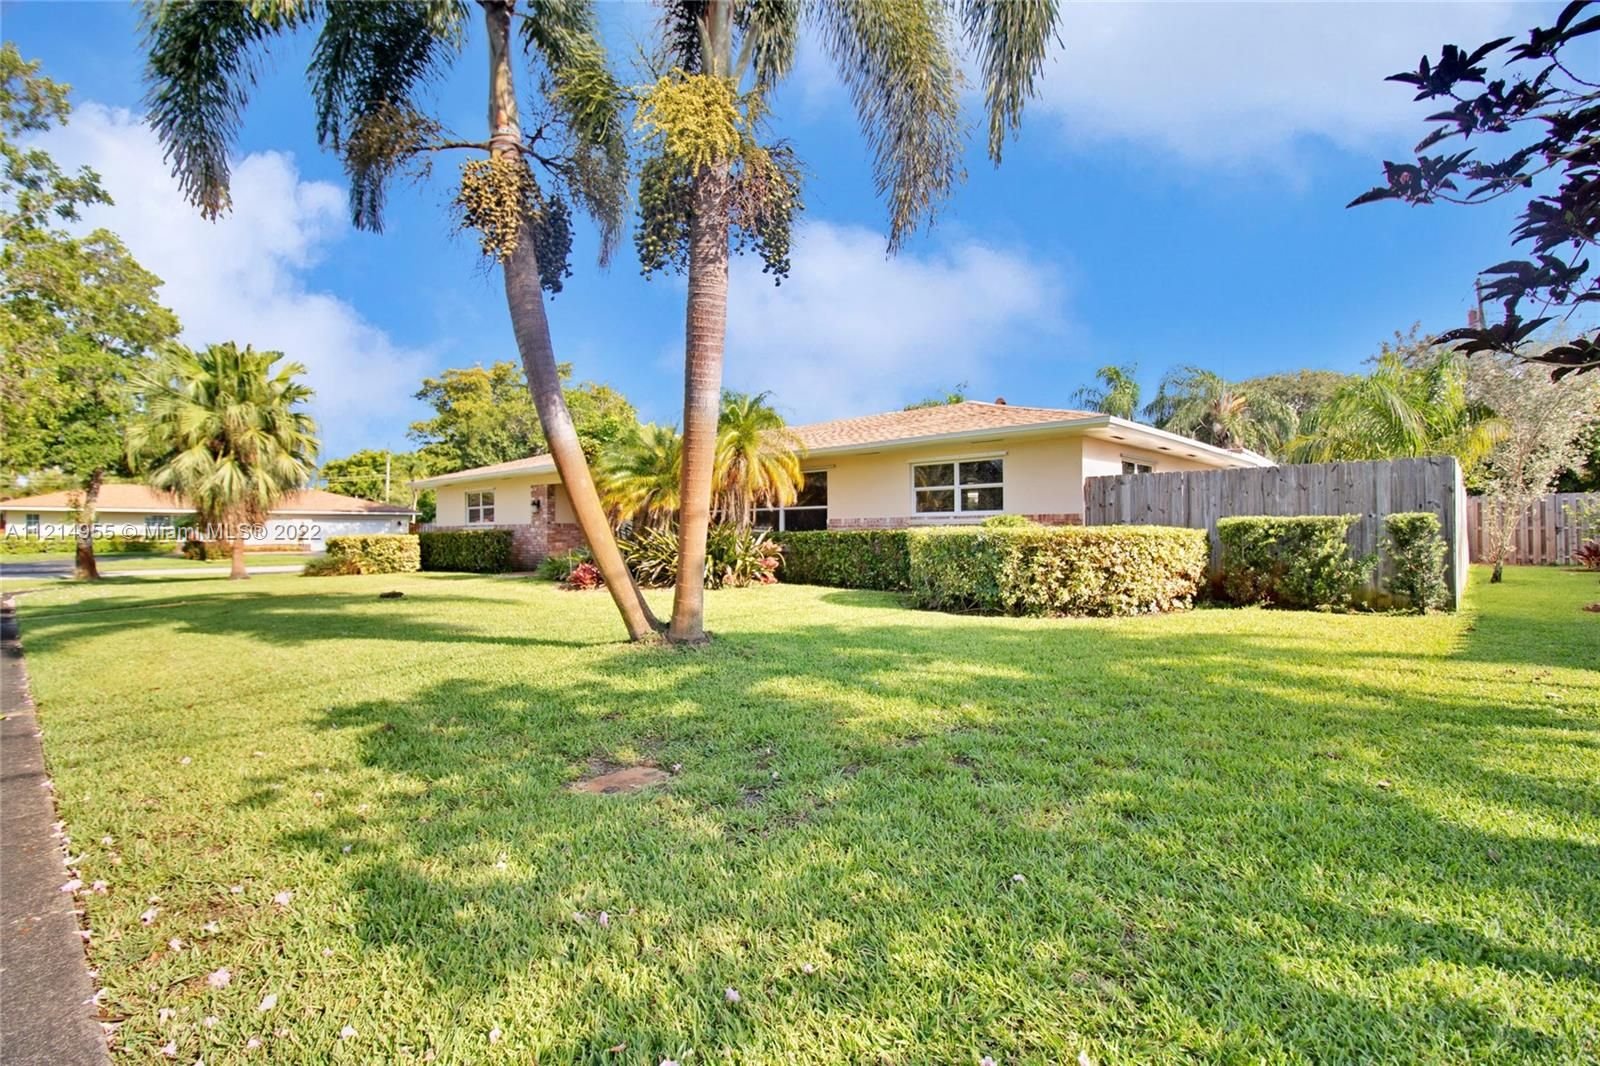 Real estate property located at 7281 7th St, Broward County, Plantation, FL